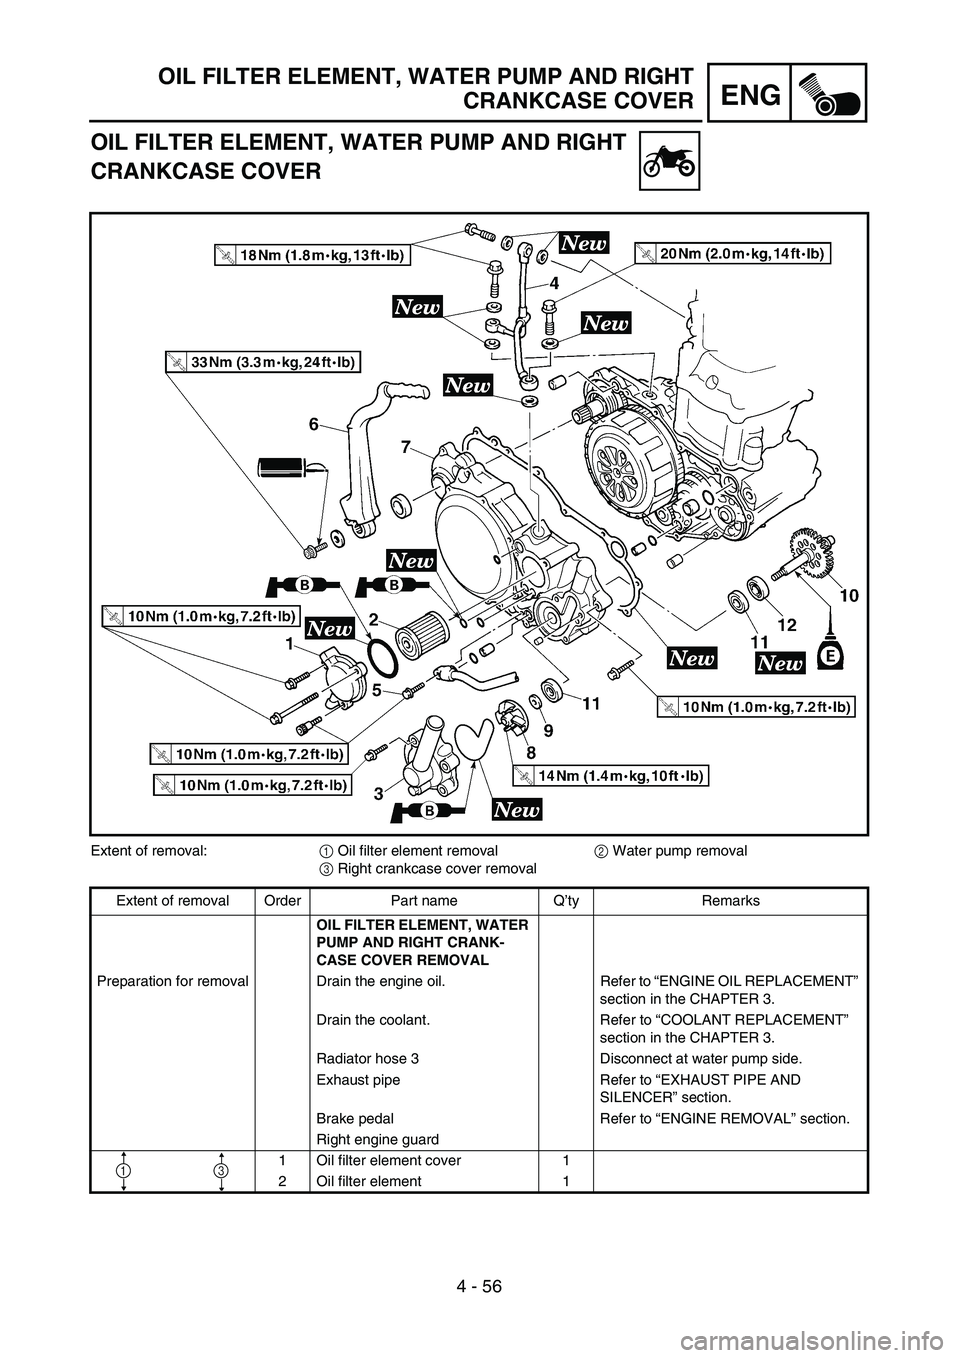 YAMAHA YZ250F 2002  Owners Manual 4 - 56
ENG
OIL FILTER ELEMENT, WATER PUMP AND RIGHT
CRANKCASE COVER
OIL FILTER ELEMENT, WATER PUMP AND RIGHT   
CRANKCASE COVER
Extent of removal:1 Oil filter element removal2 Water pump removal
3 Rig